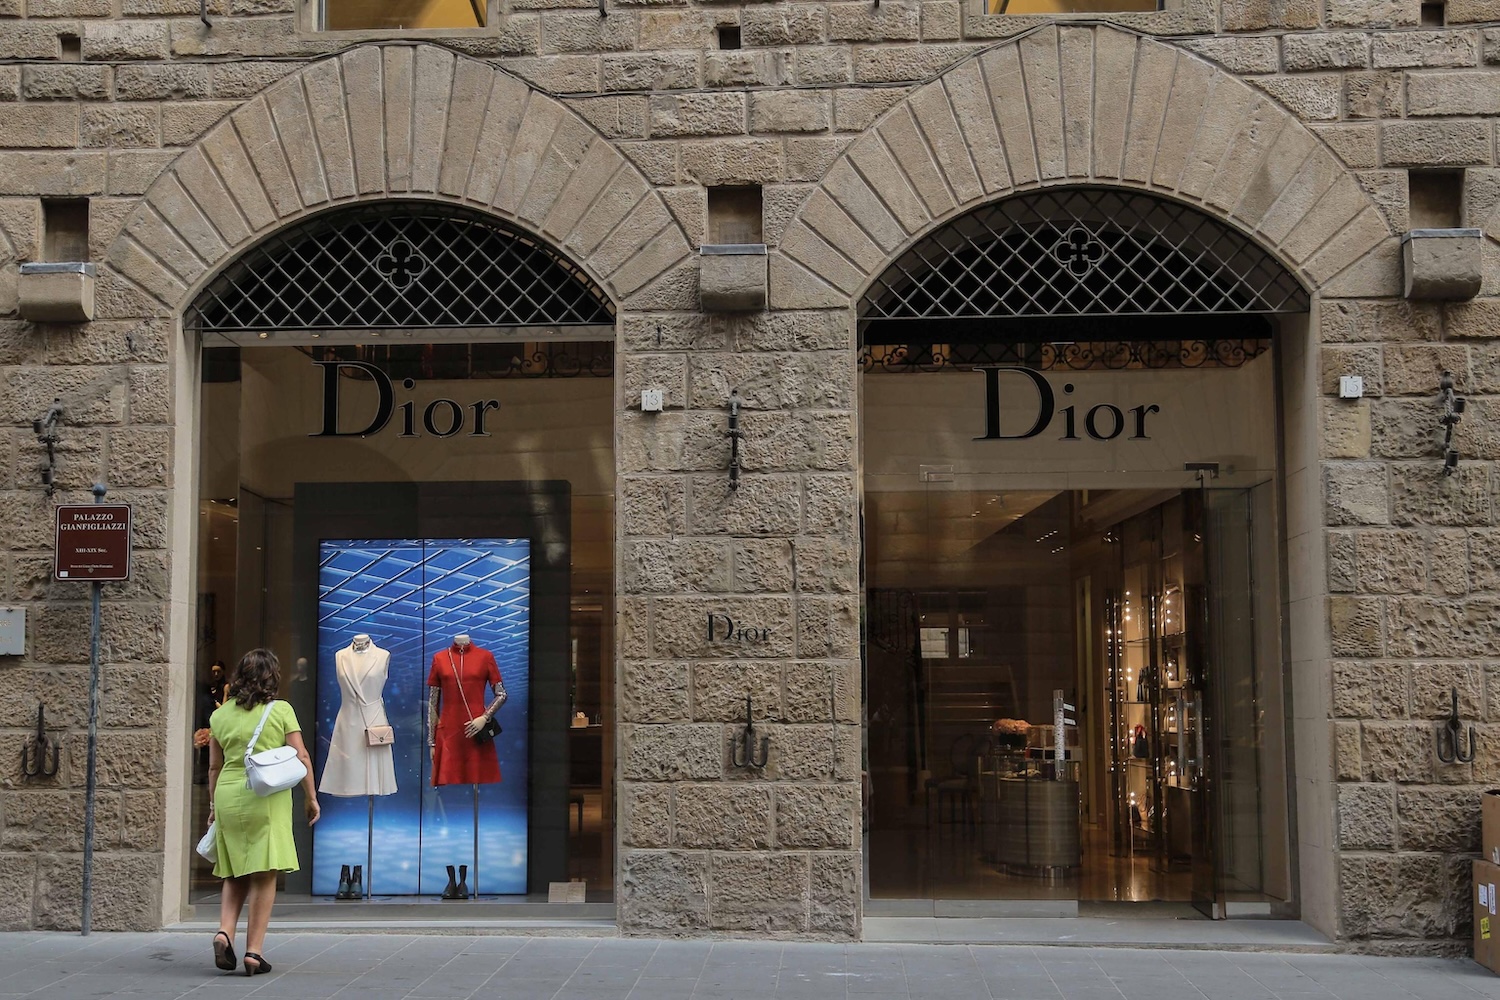 Workers exploited behind ‘Made in Italy’ Other fashion brands tremble after the Dior case: so the investigation in Milan risks widening